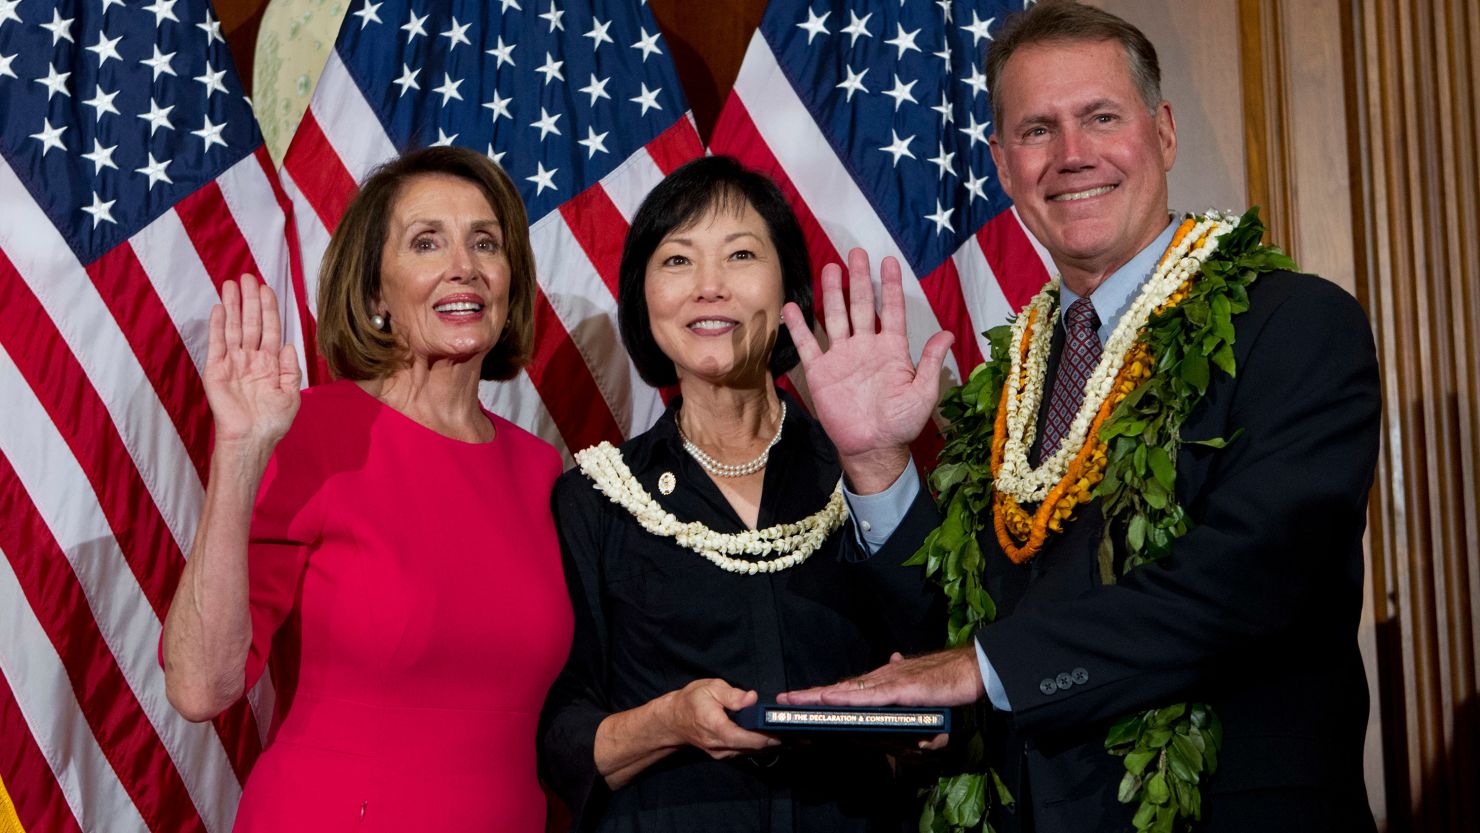 House Speaker Nancy Pelosi of Calif., administers the House oath of office to Rep. Ed Case, D-Hawaii, during ceremonial swearing-in on Capitol Hill in Washington, Thursday, Jan. 3, 2019, during the opening session of the 116th Congress. (AP Photo/Jose Luis Magana)